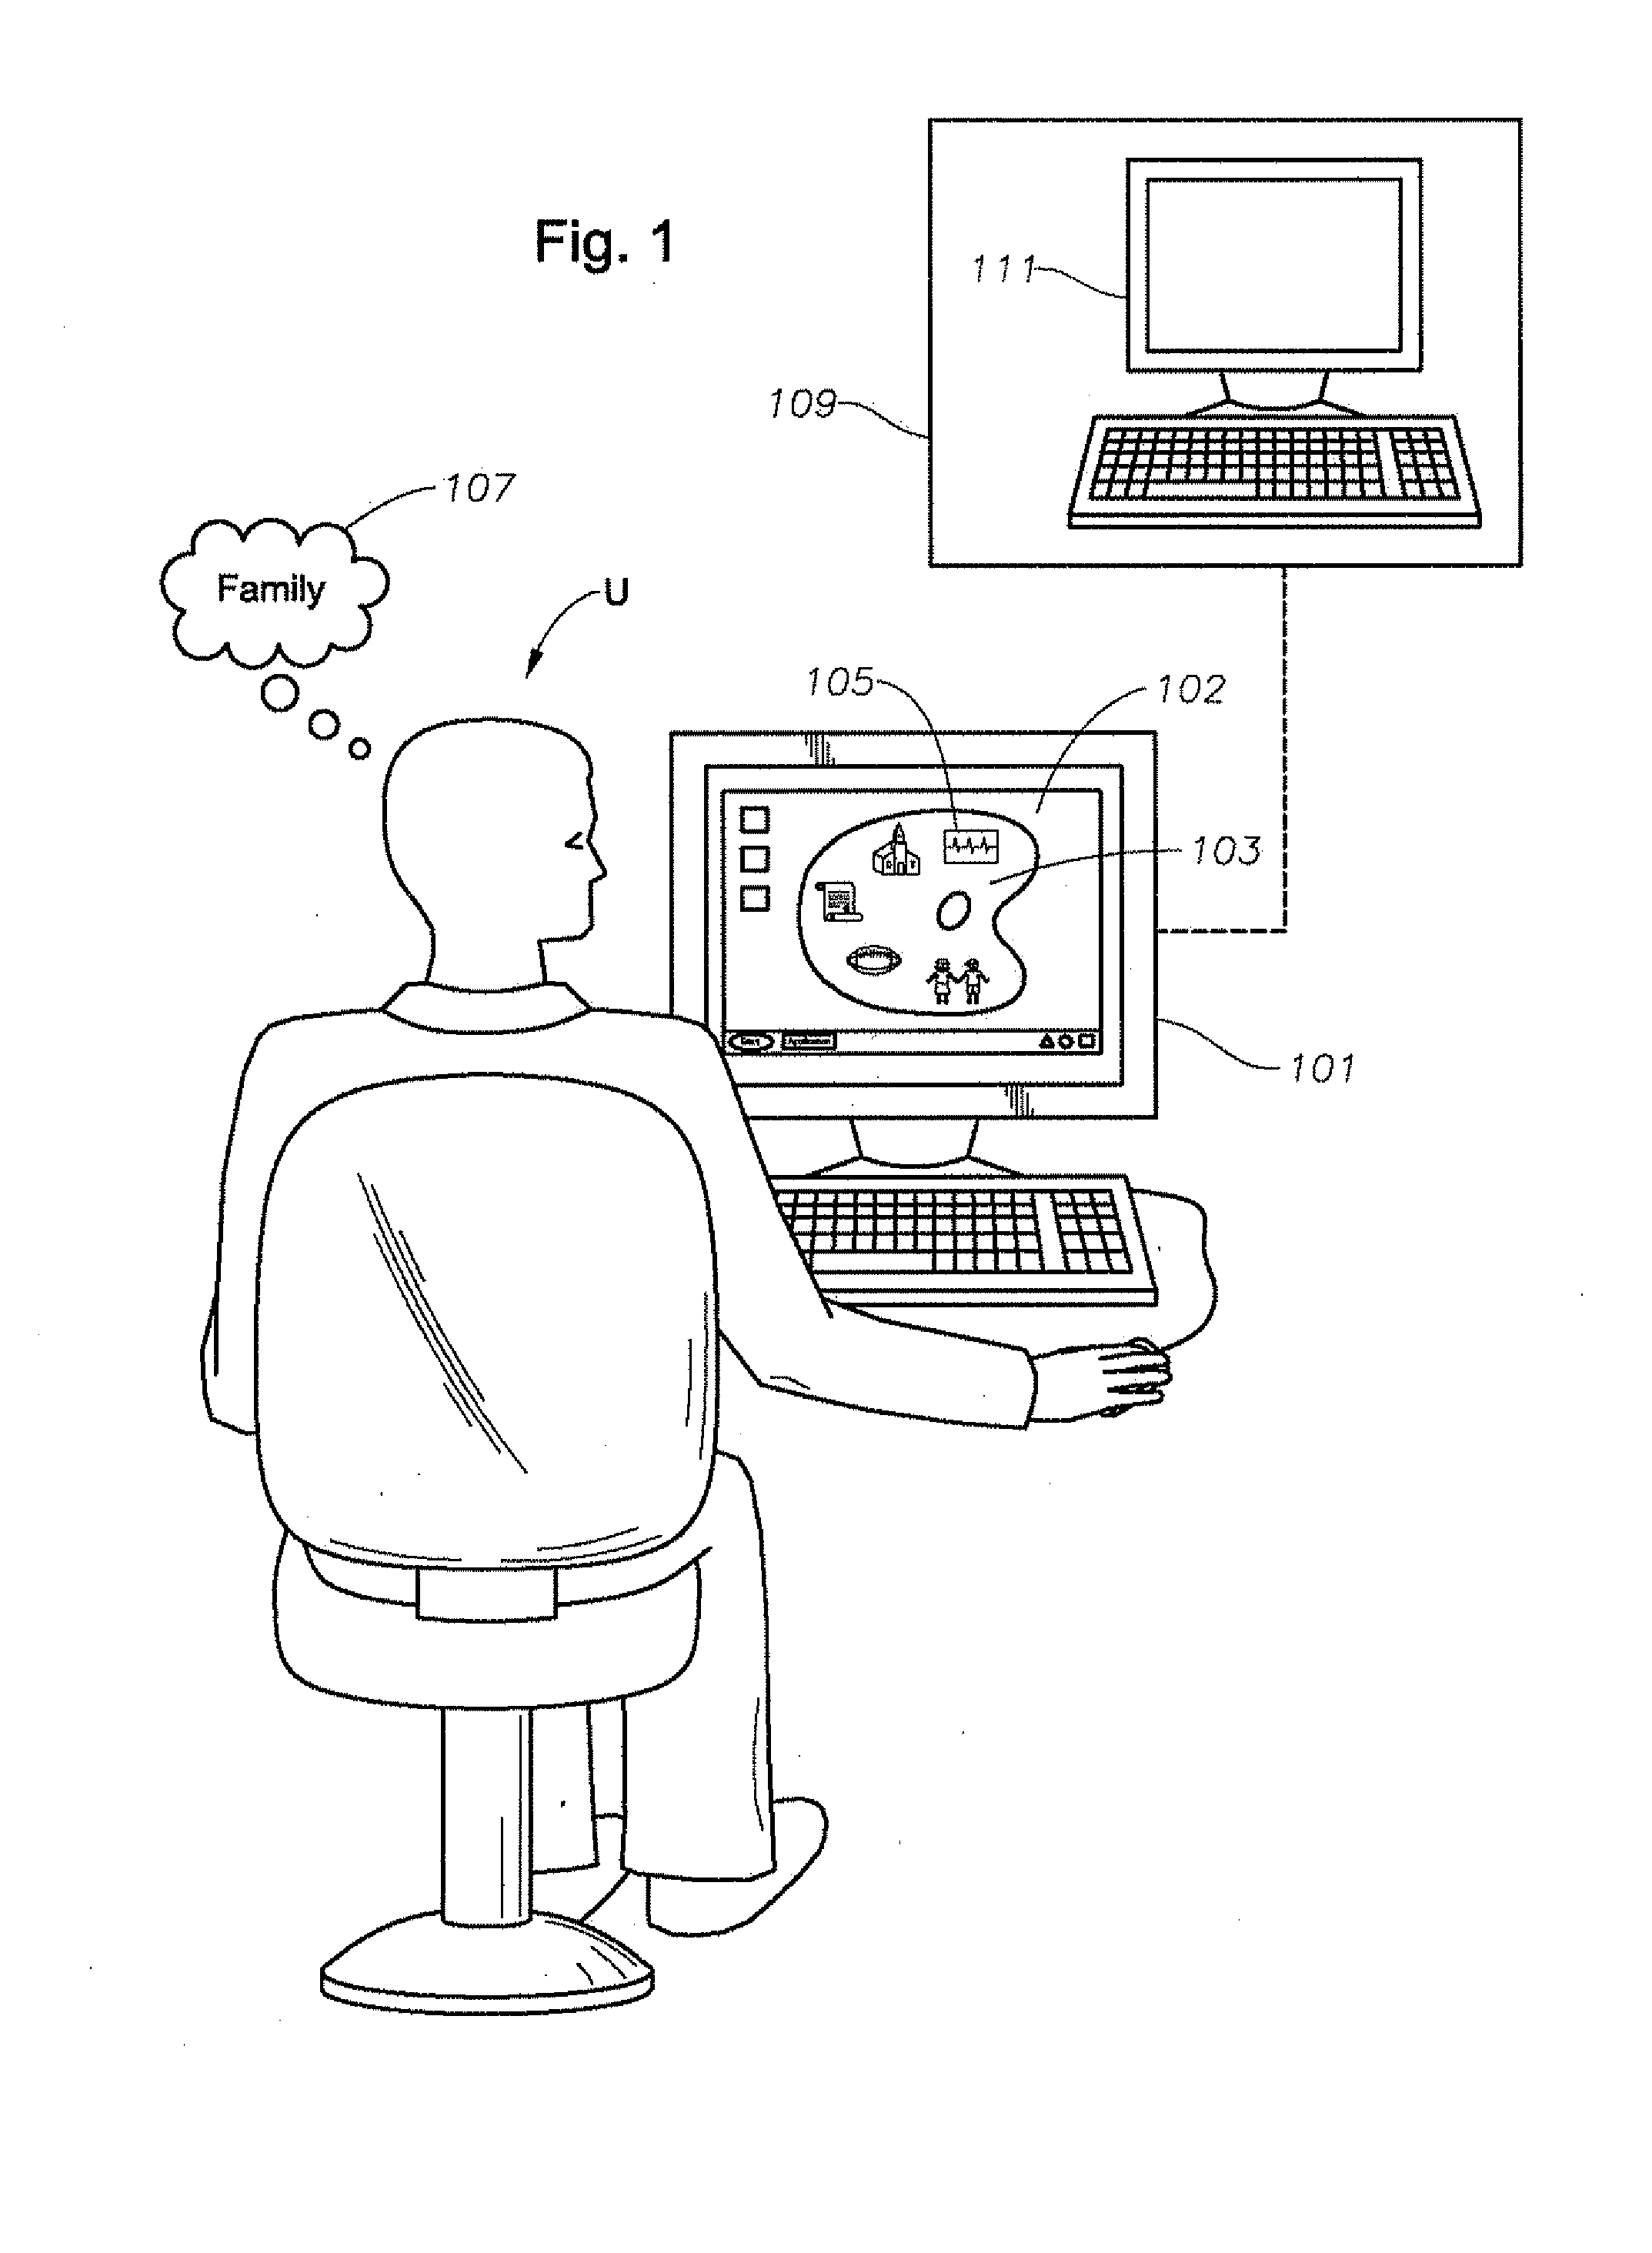 Machine, Program Product, And Computer-Implemented Method For File Management, Storage, And Display